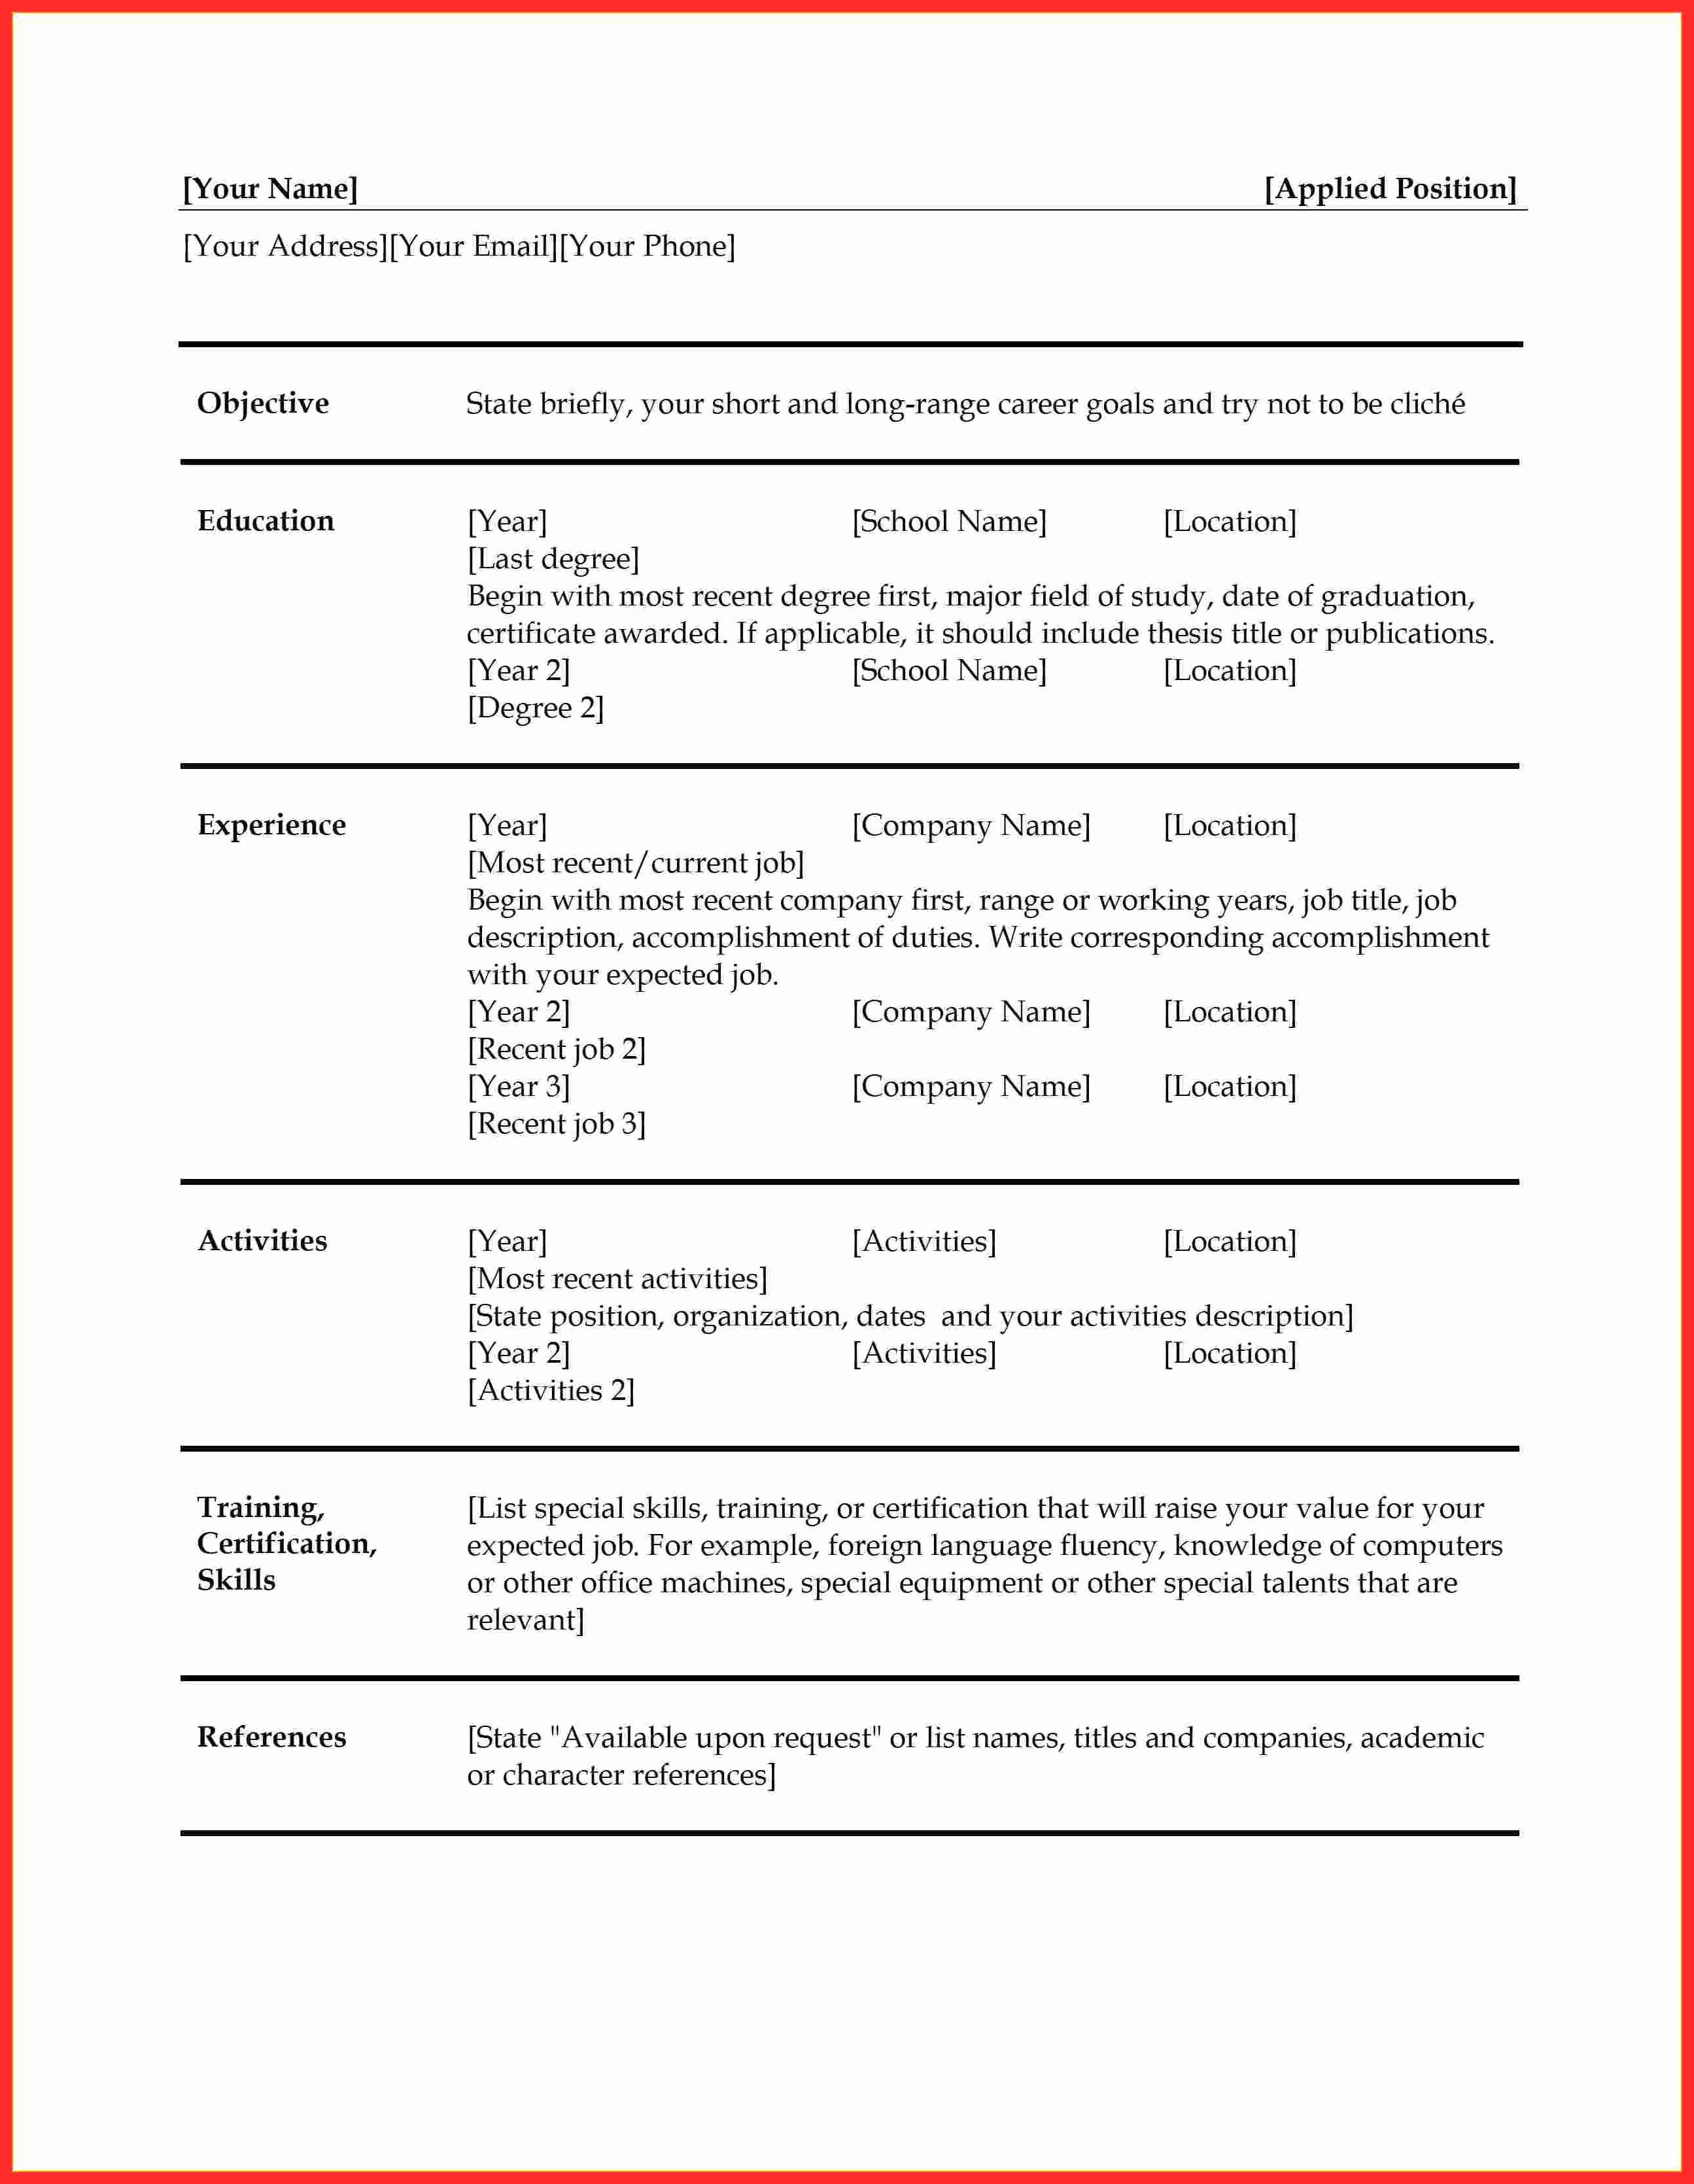 Resume forms to Fill Out Elegant Filling Out A Letter